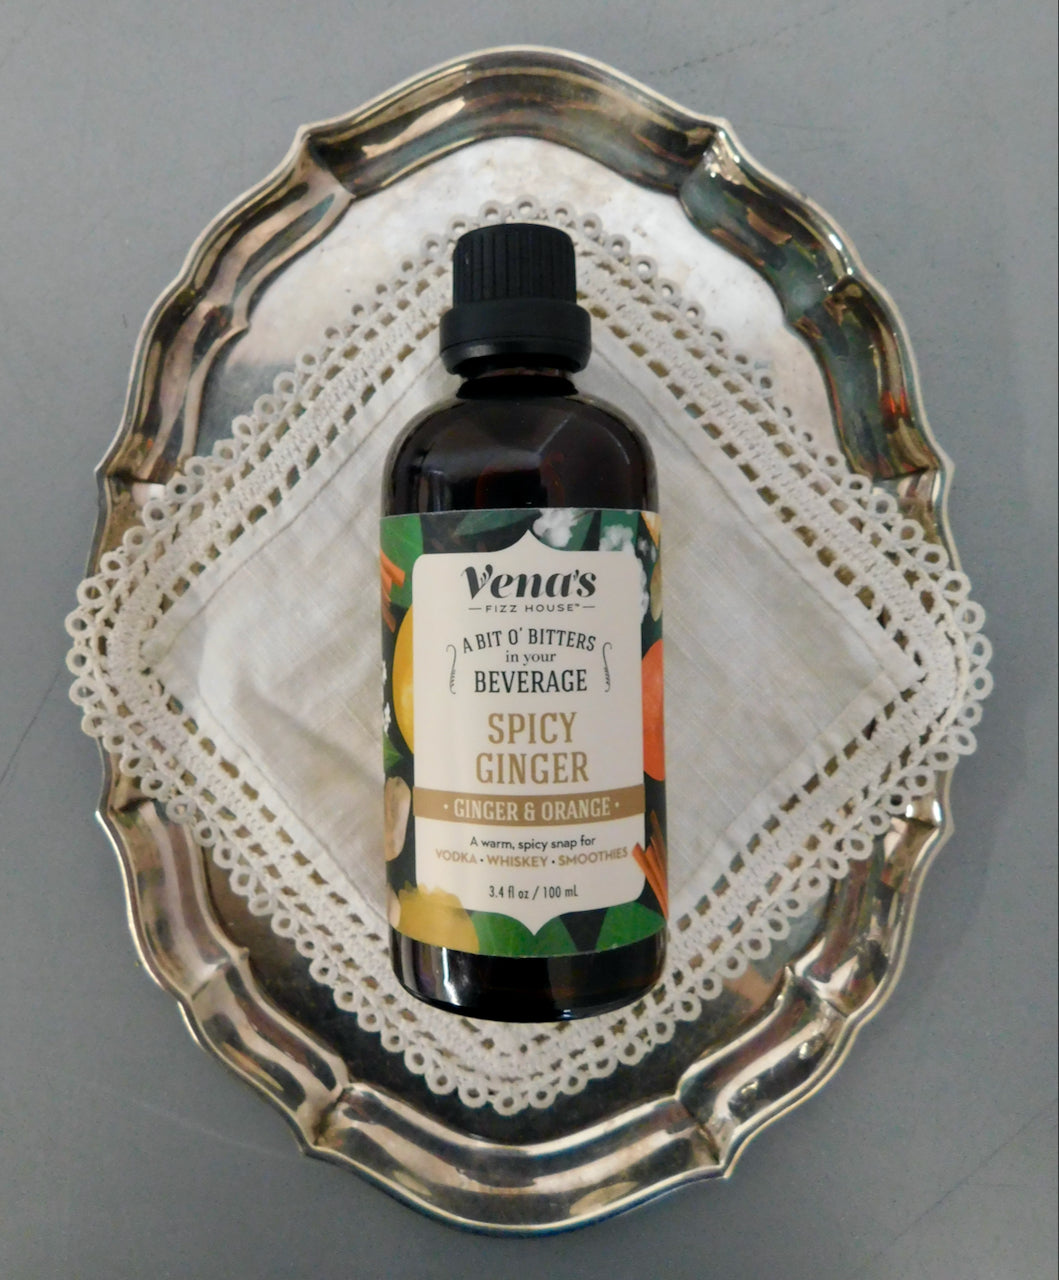 Vena's Spicy Ginger Bitters